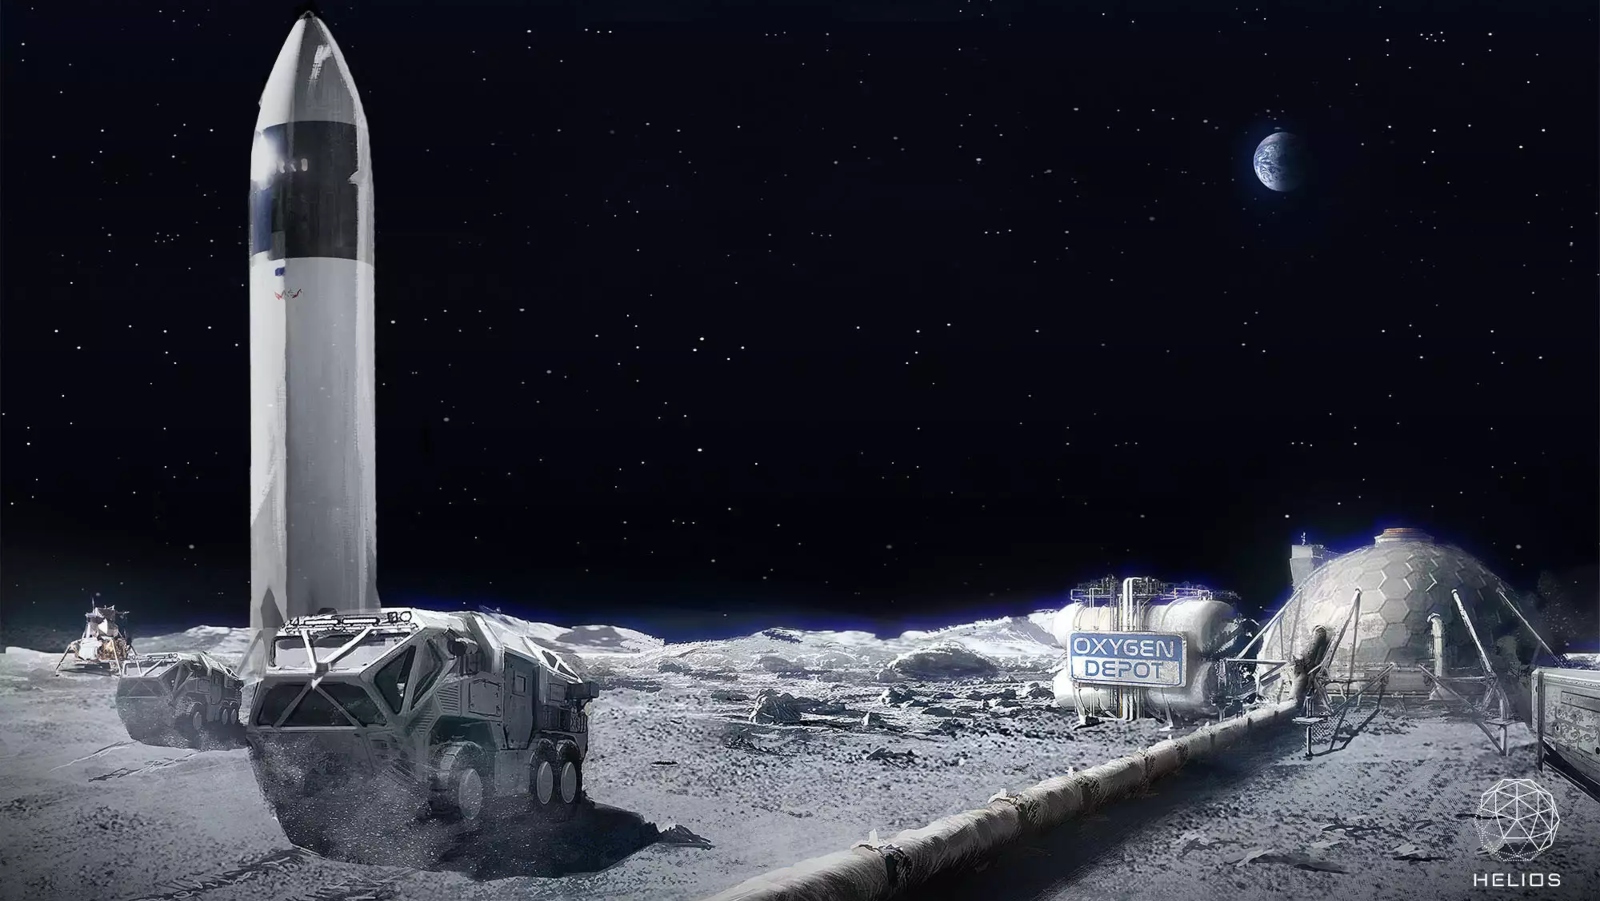 Artist's rendering of an oxygen production, liquification and storage facility on the Moon. Image courtesy of Helios